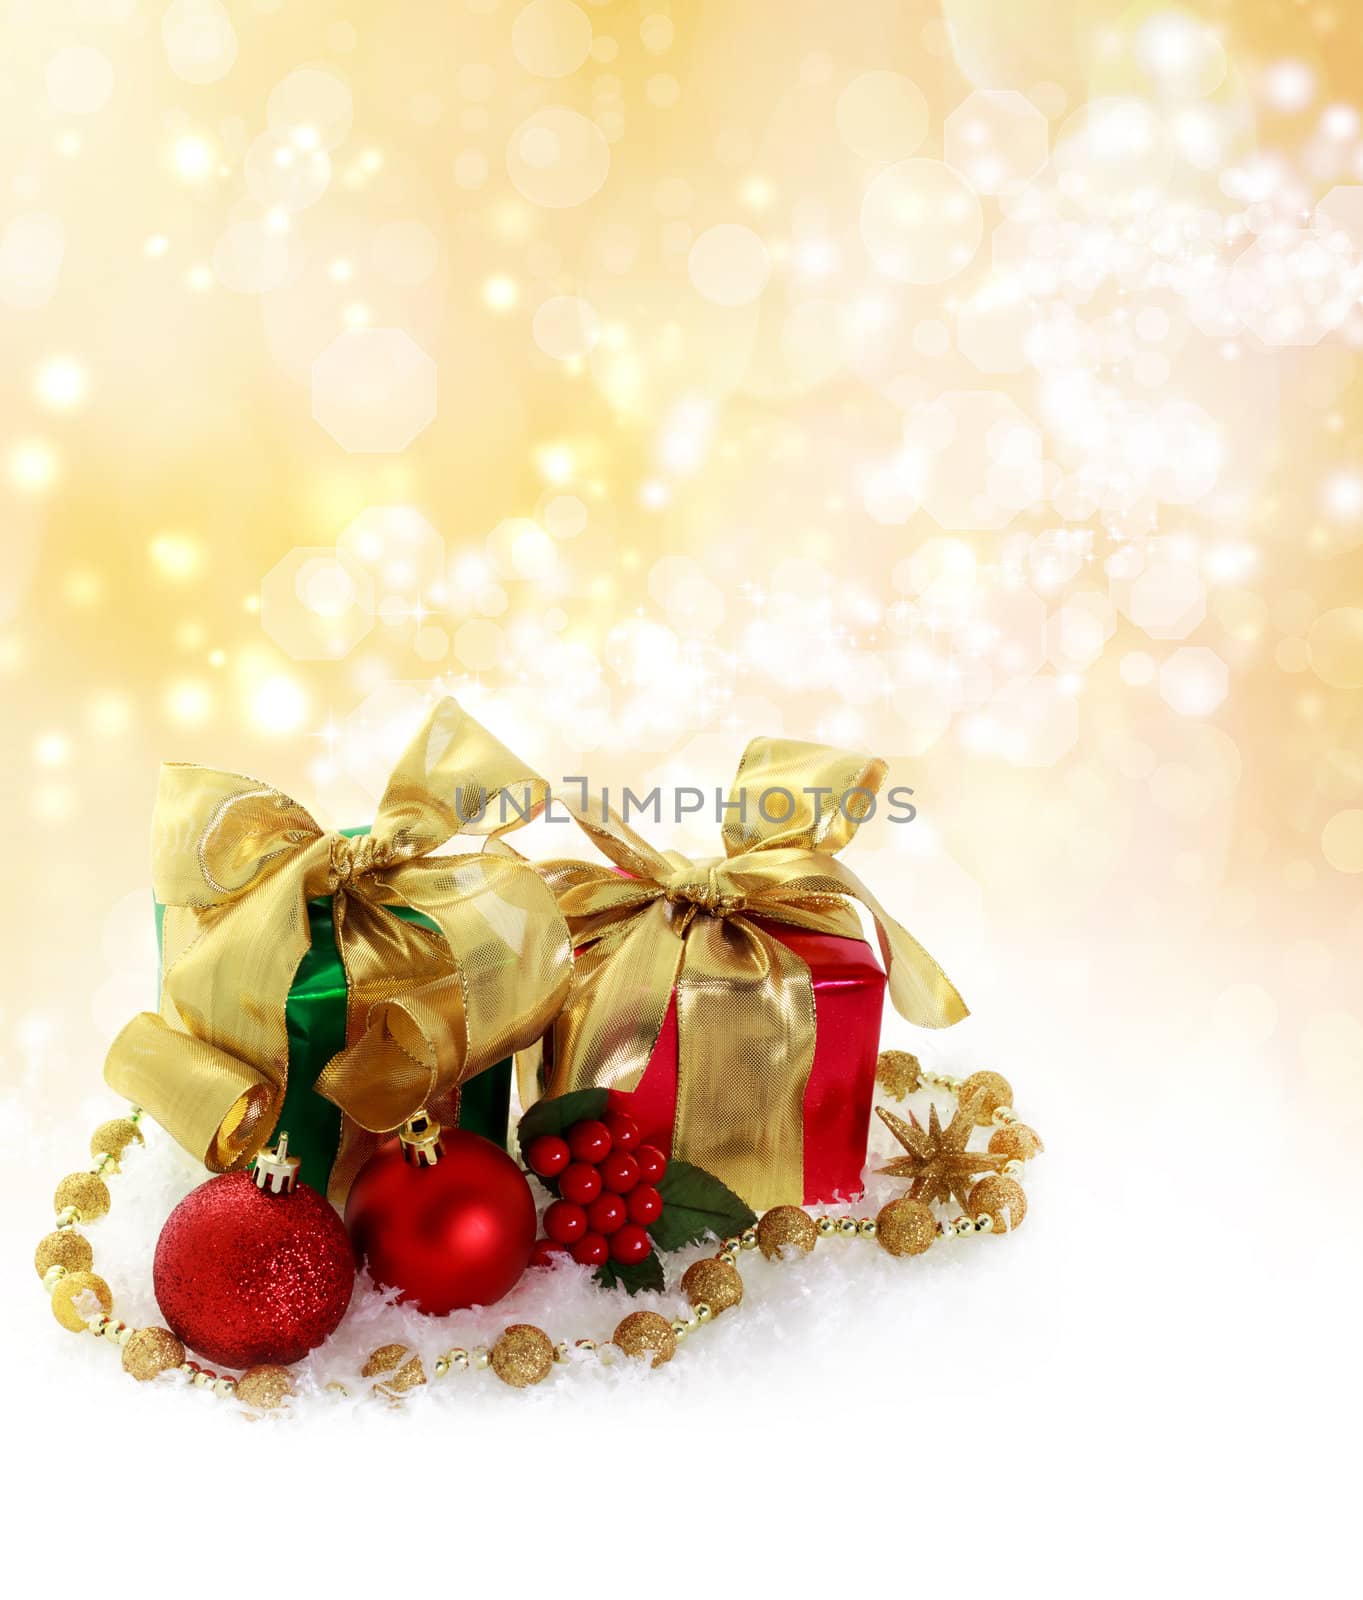 Red and green Christmas gifts over golden lights background